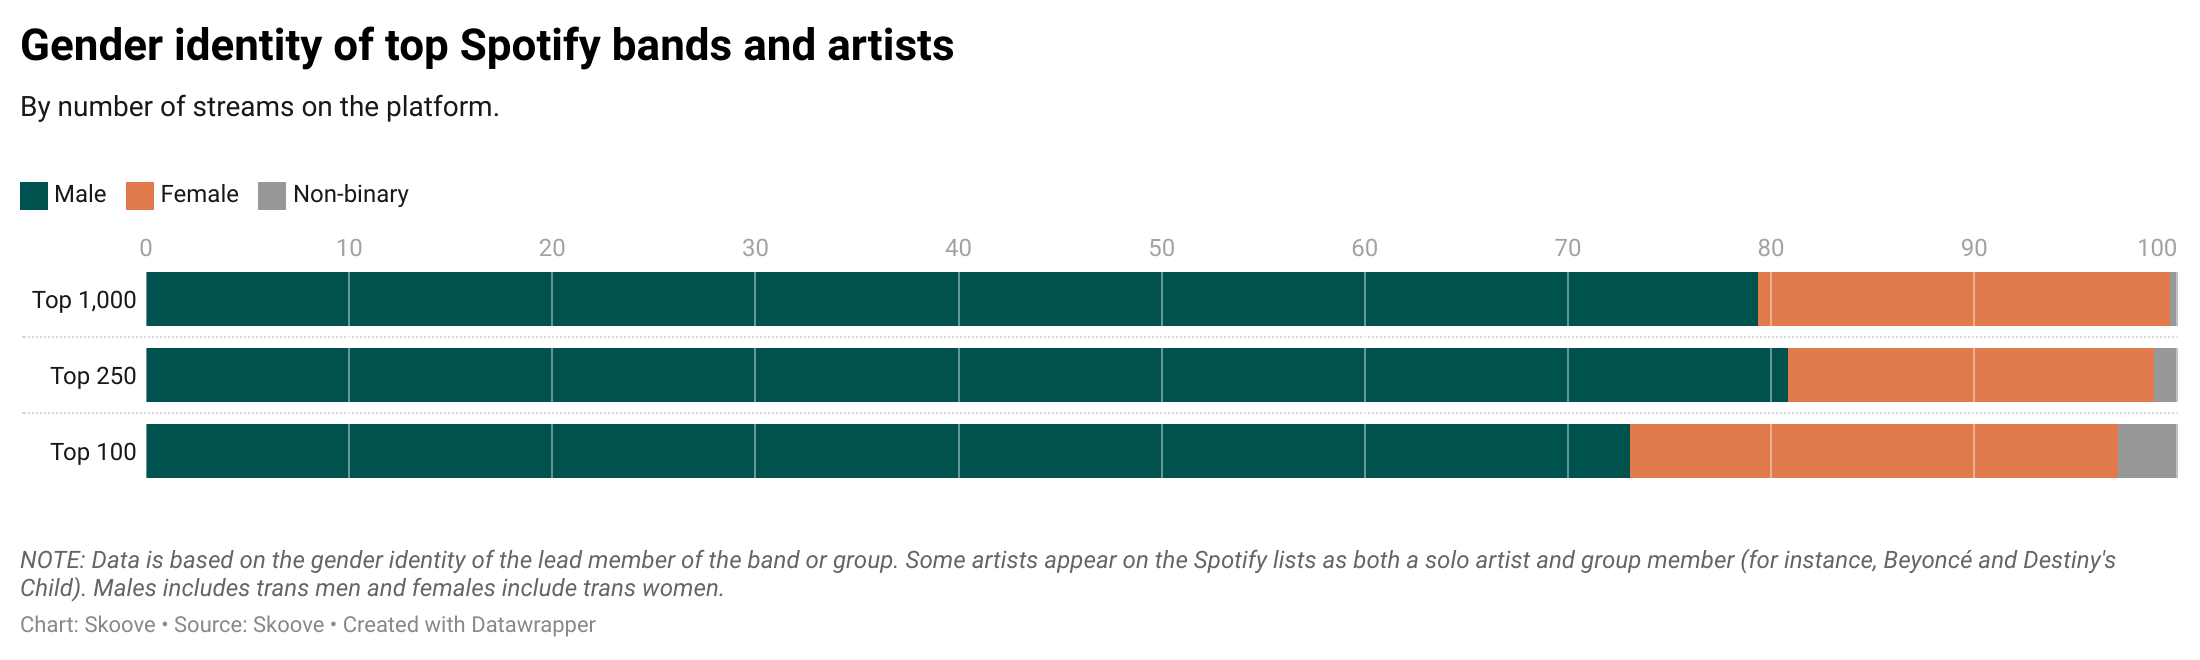 Graph showing gender identity variation of top Spotify bands and artists.